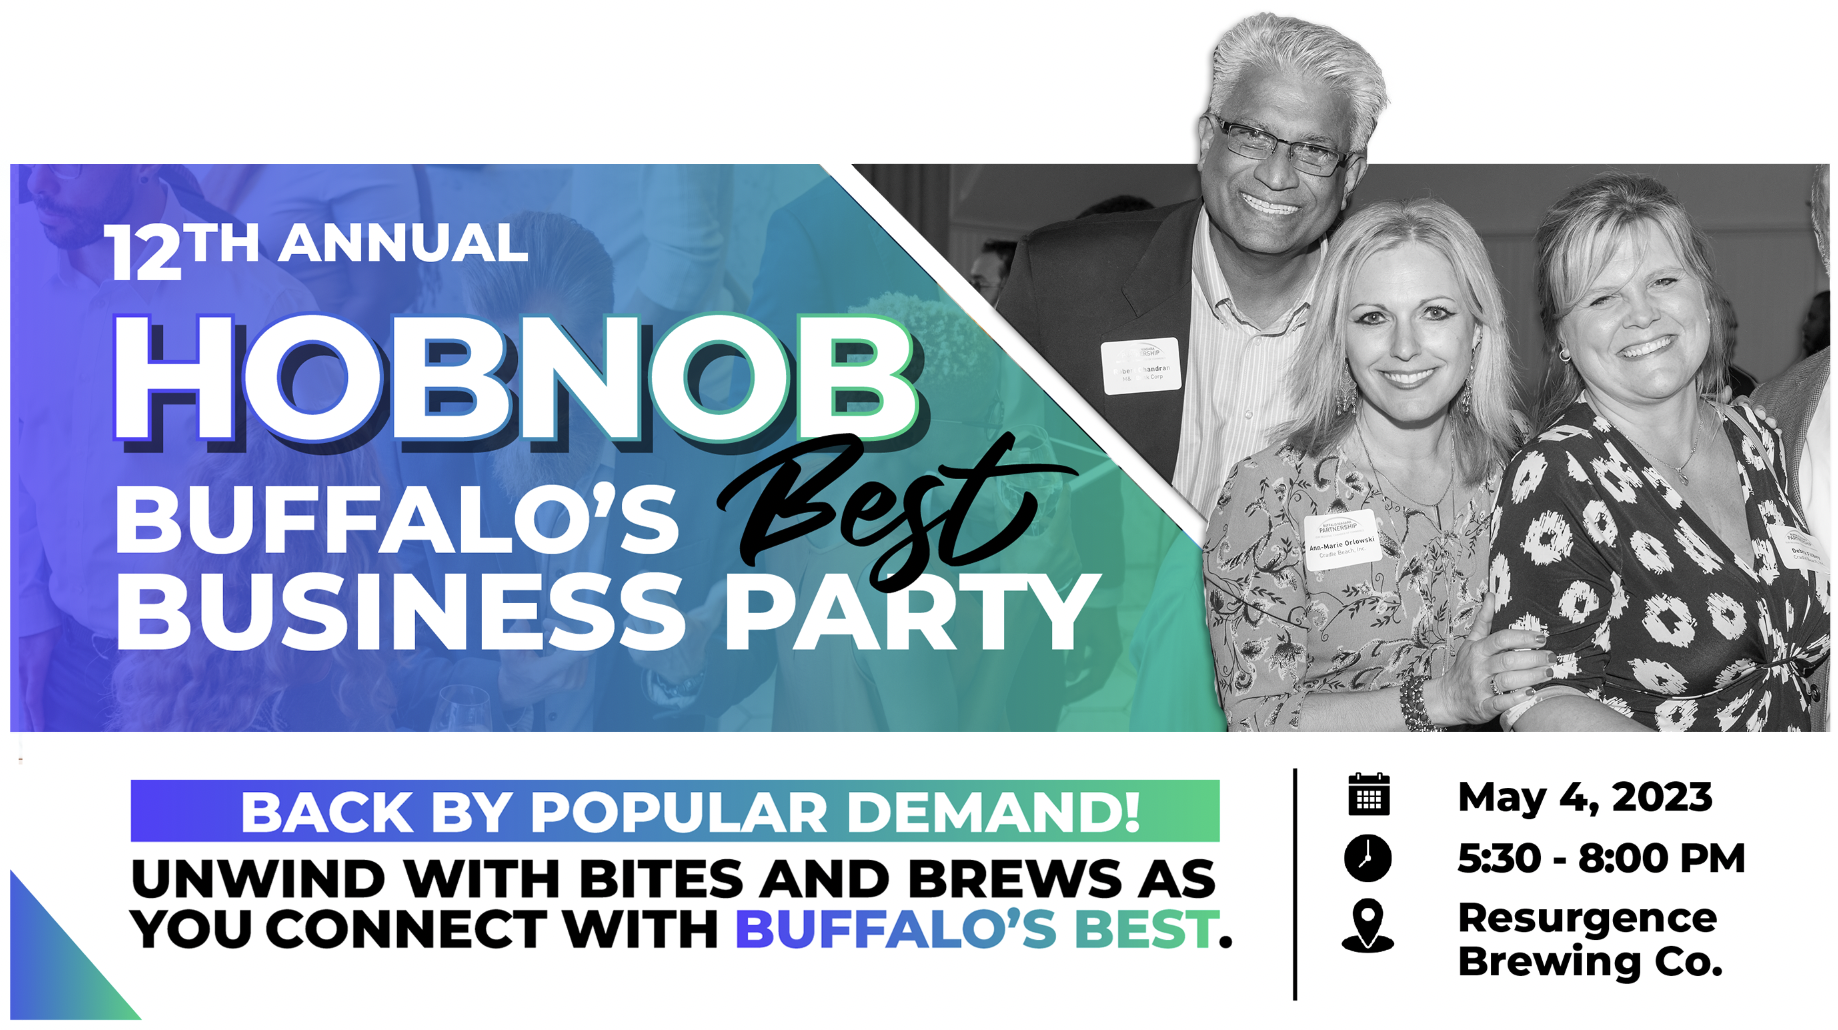 Image of 3 people and text that says 12th Annual HobBob Buffalo's Best Business Party along with May 4th, 5:30-8:00 PM venue at Resurgence Brewing Co. Back by Popular Demand,unwinde with bites and brews as you connect with Buffalo's Best